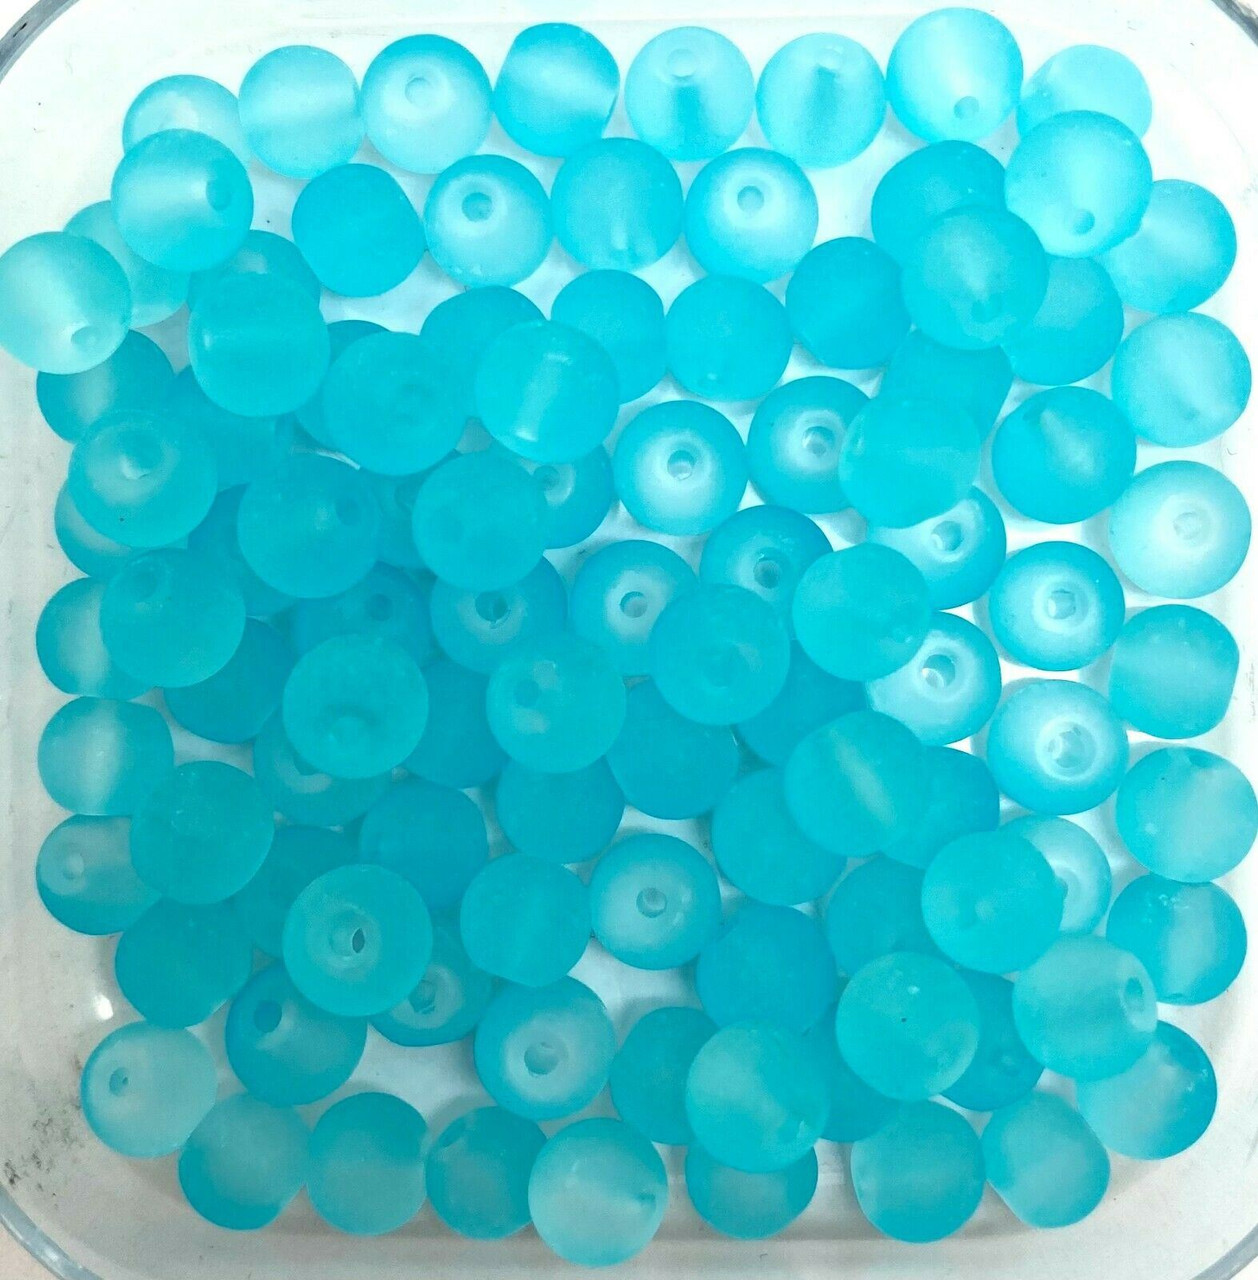 8mm Frosted Glass Beads - Turquoise, approx 50 beads